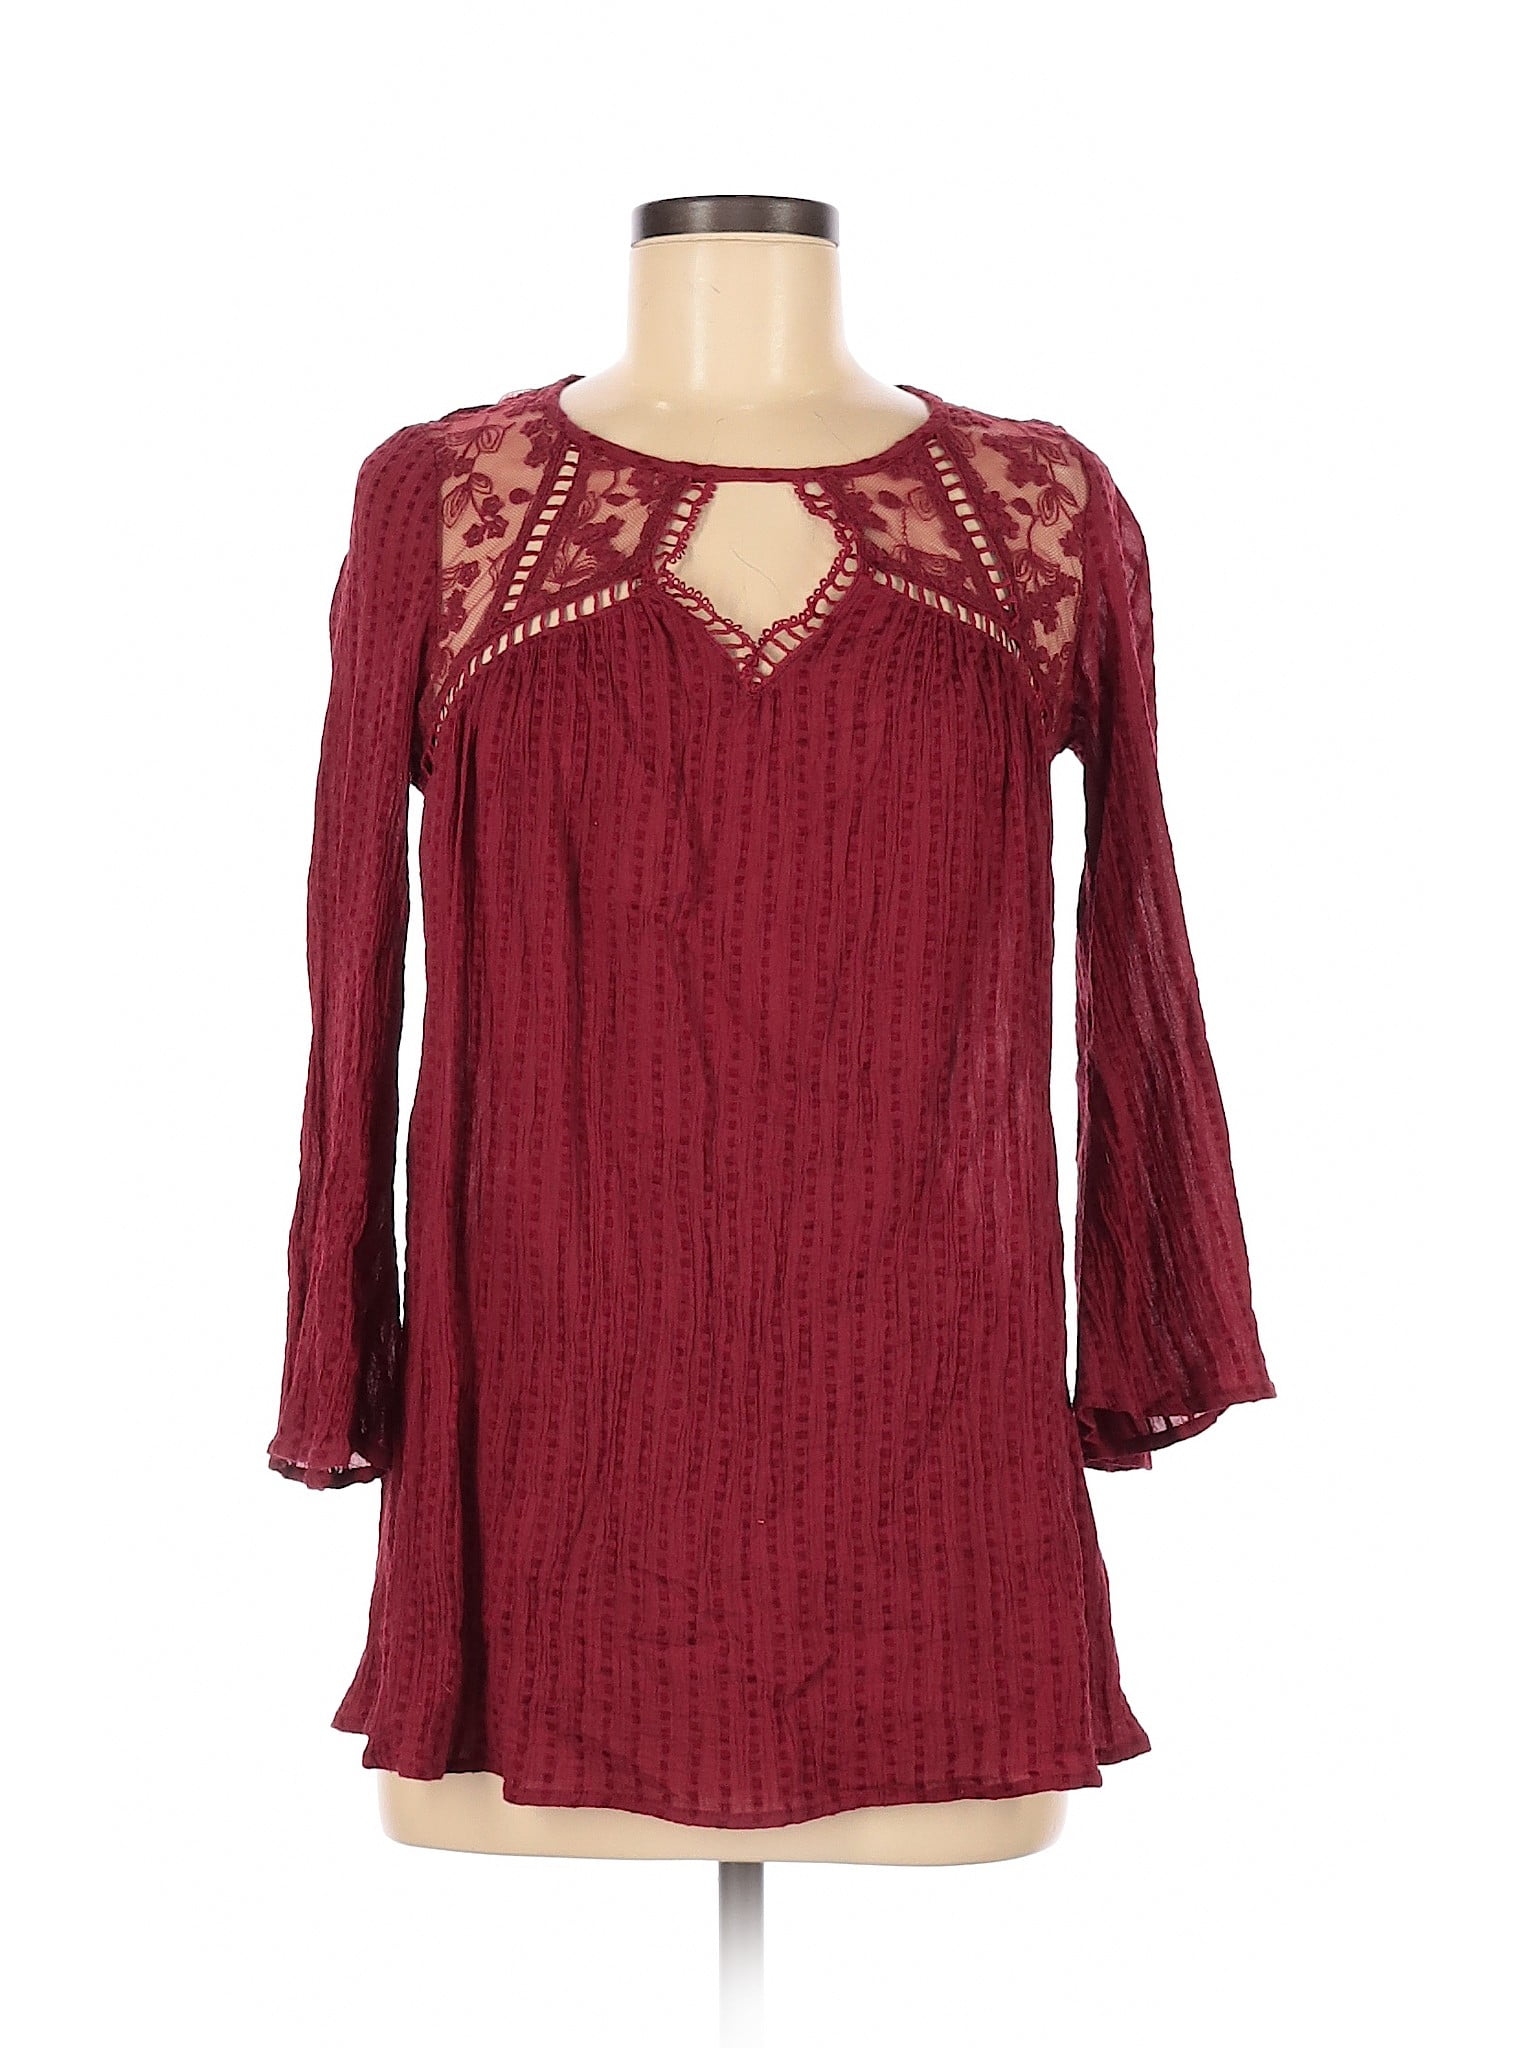 Weekend Suzanne Betro - Pre-Owned Weekend Suzanne Betro Women's Size M ...